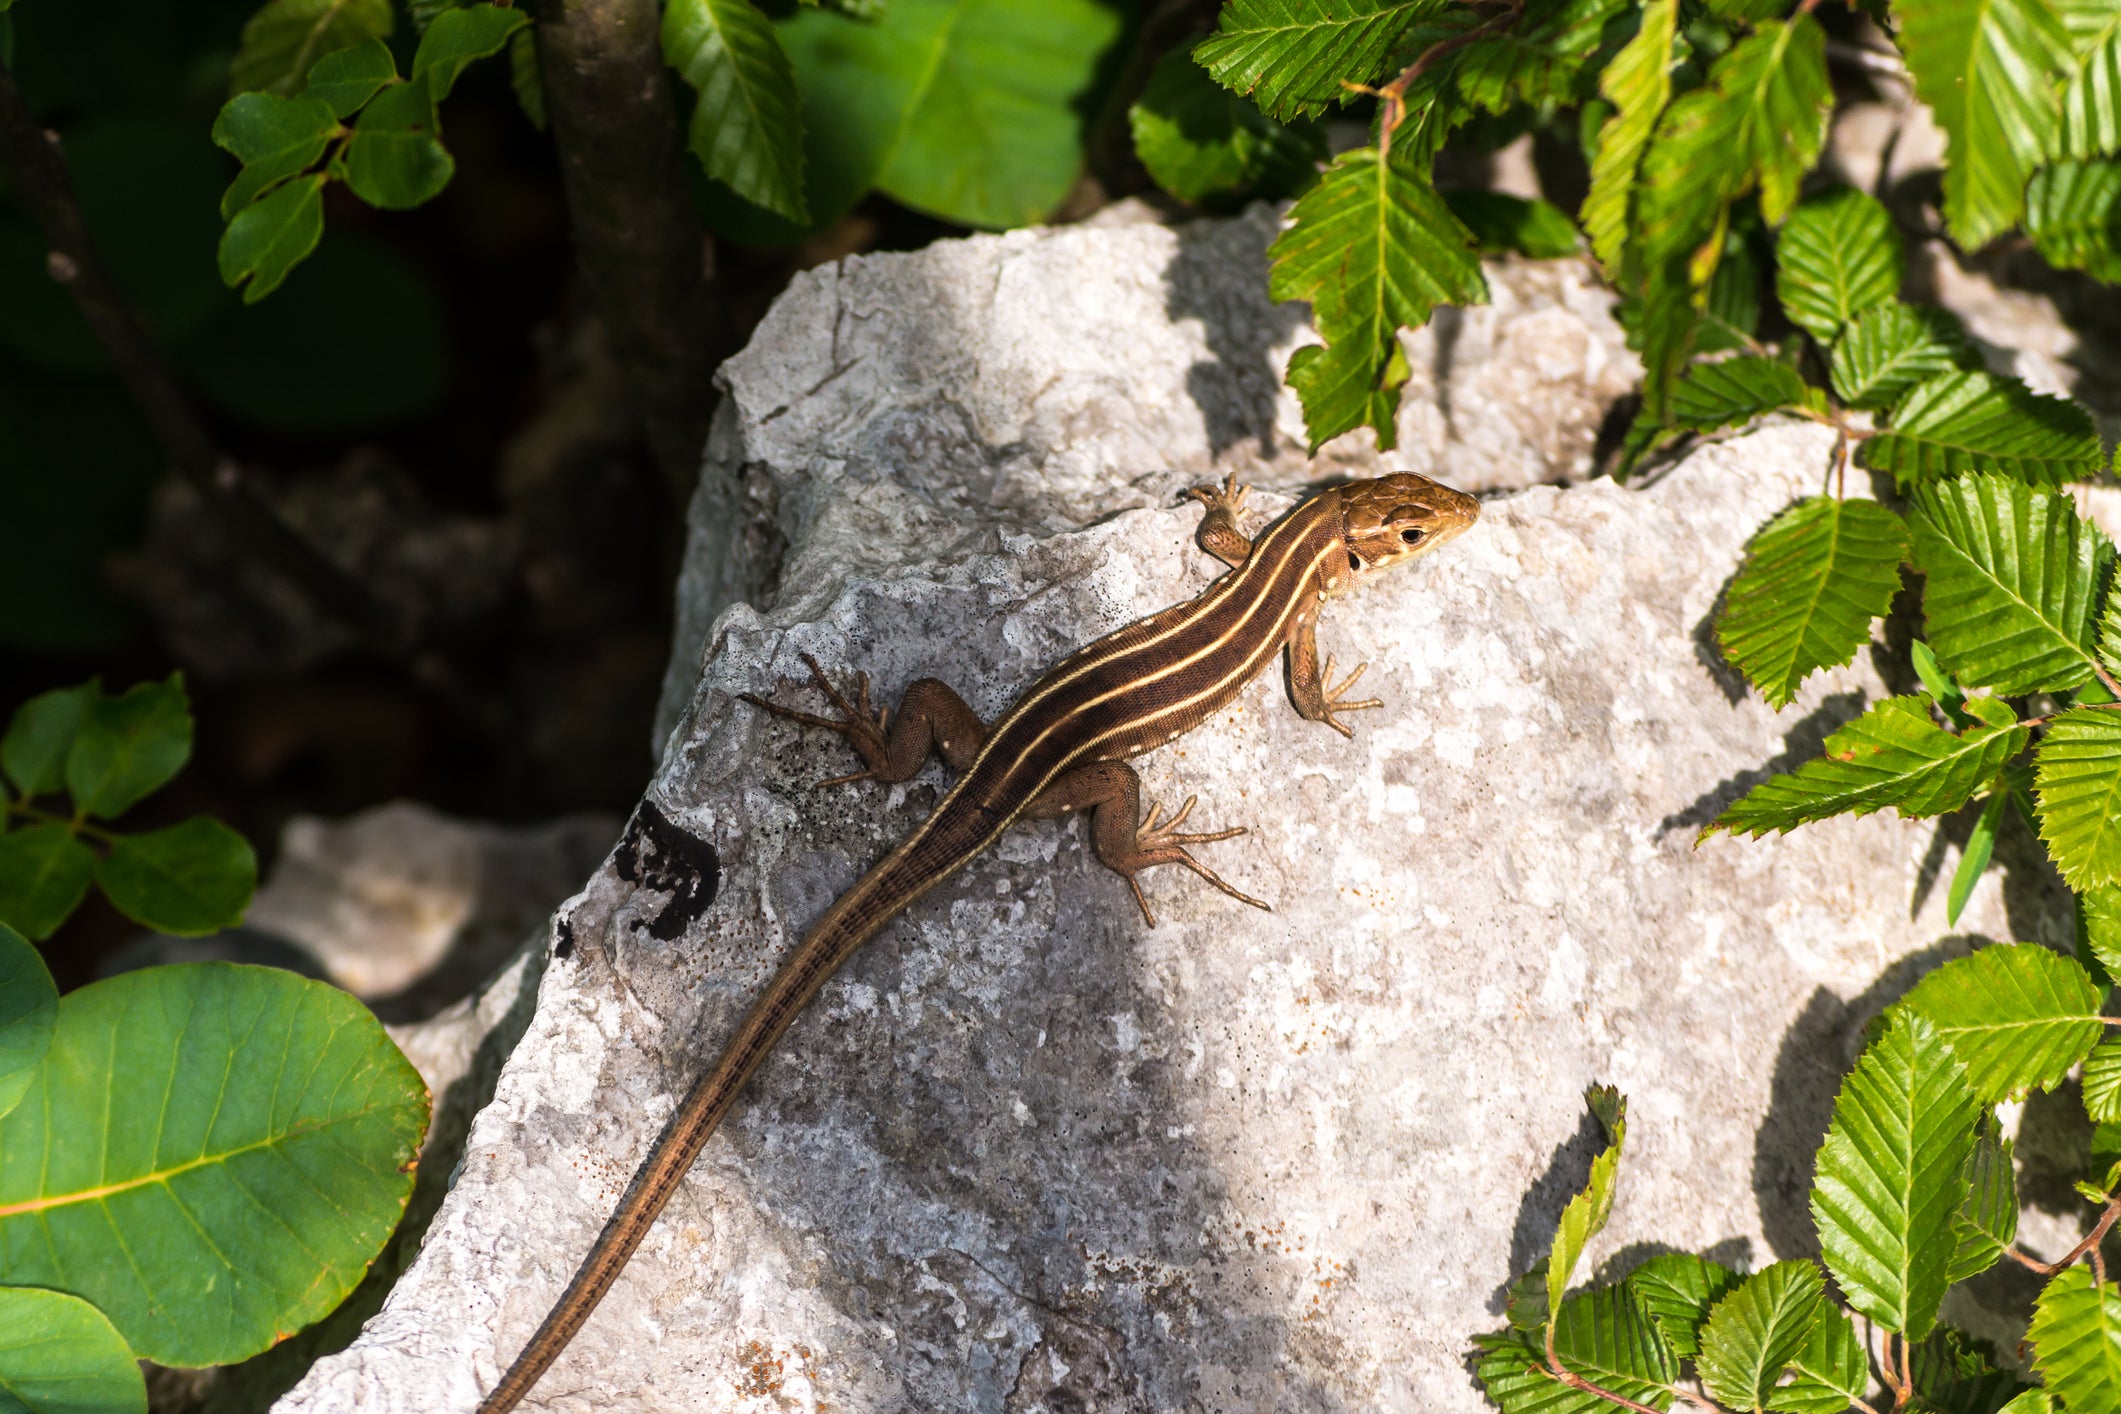 Lizards’ temperatures run higher on islands with snakes